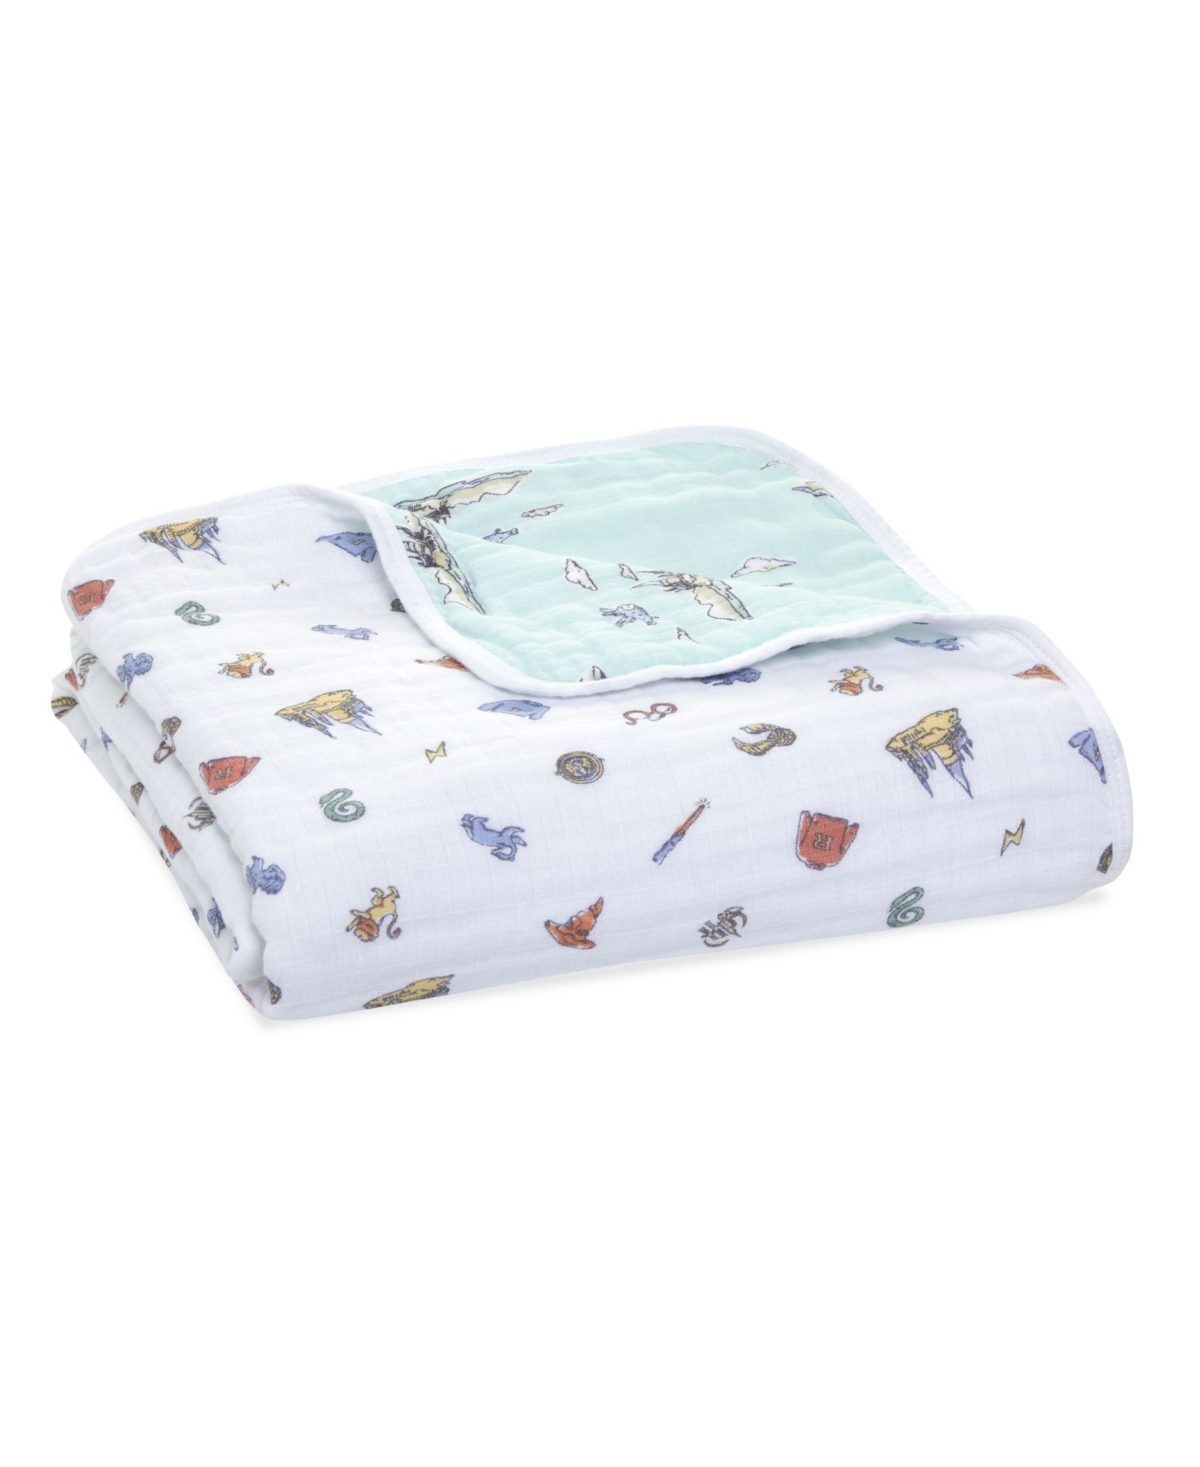 Aden By Aden + Anais Baby Boys Or Baby Girls Harry Potter Printed Blanket In Harry Potter Prints